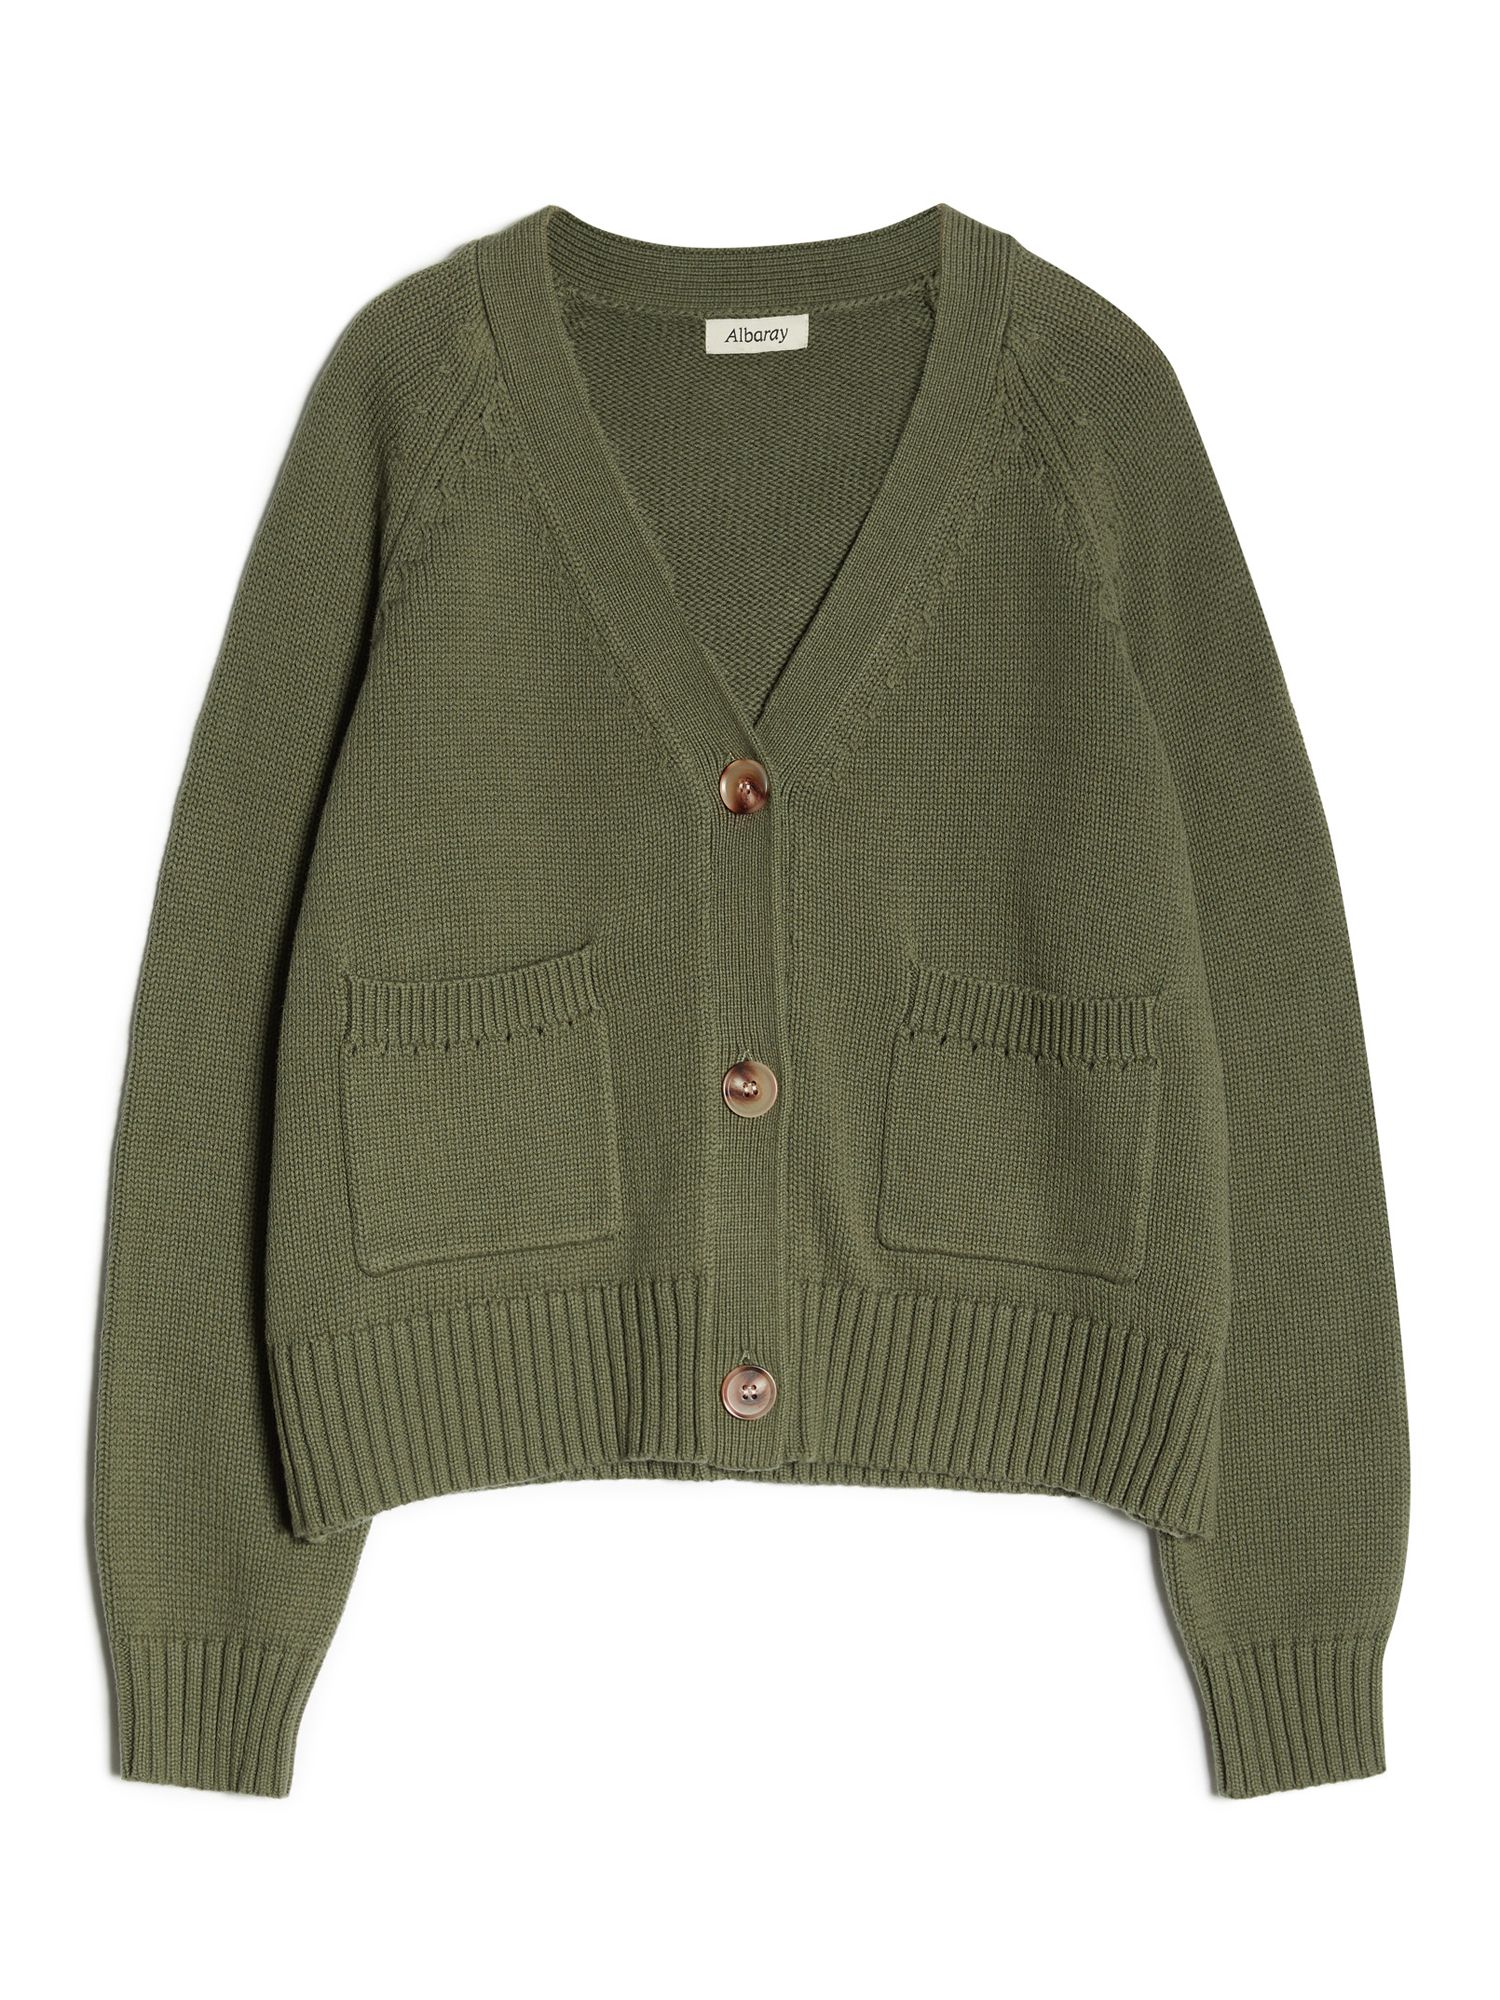 Buy Albaray Relaxed Cotton Cardigan, Olive Online at johnlewis.com